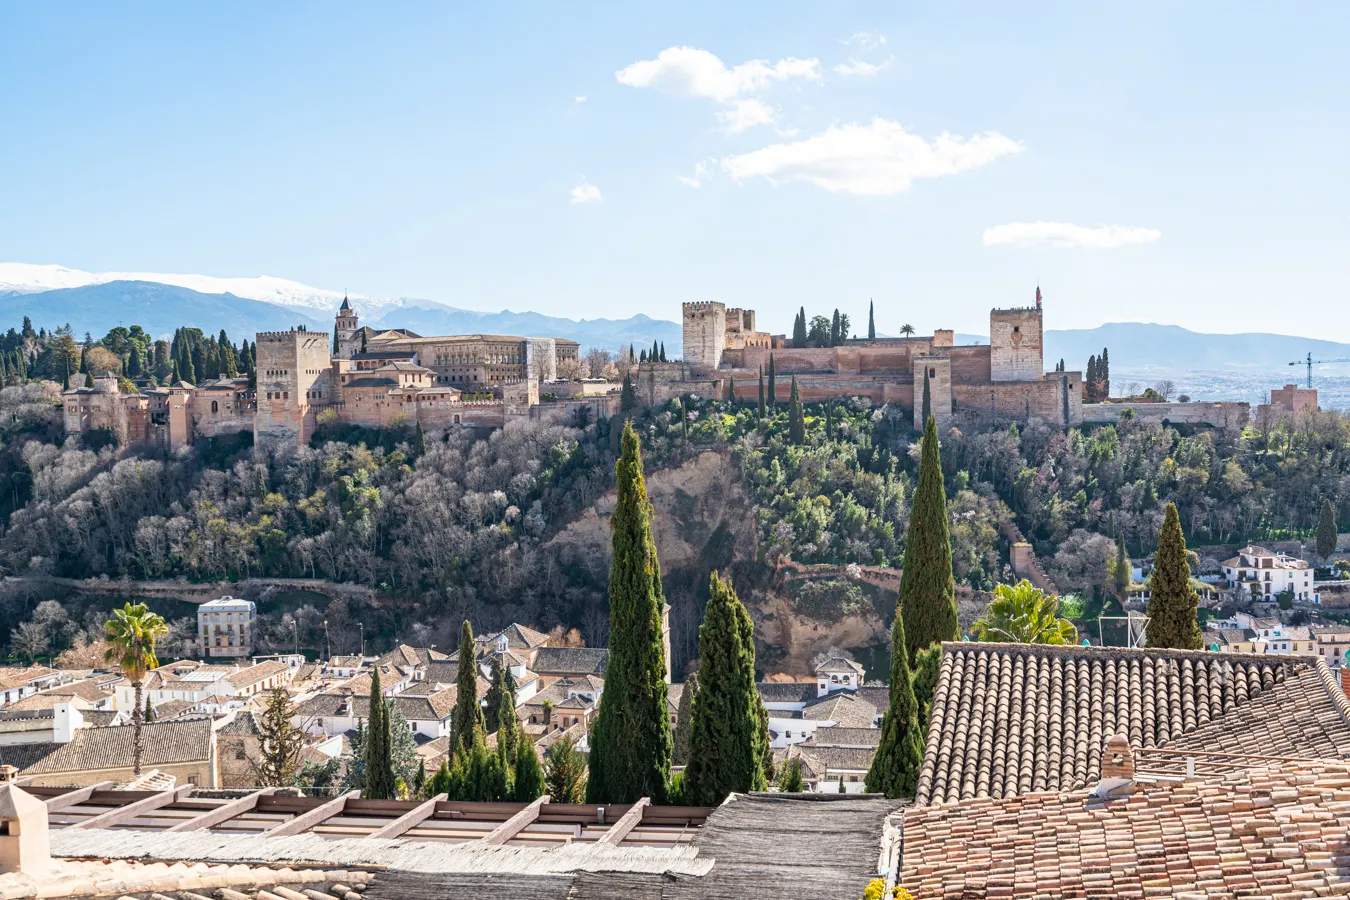 view of alhambra from mirador san nicholas, one of the top attractions on an andalucia road trip itinerary